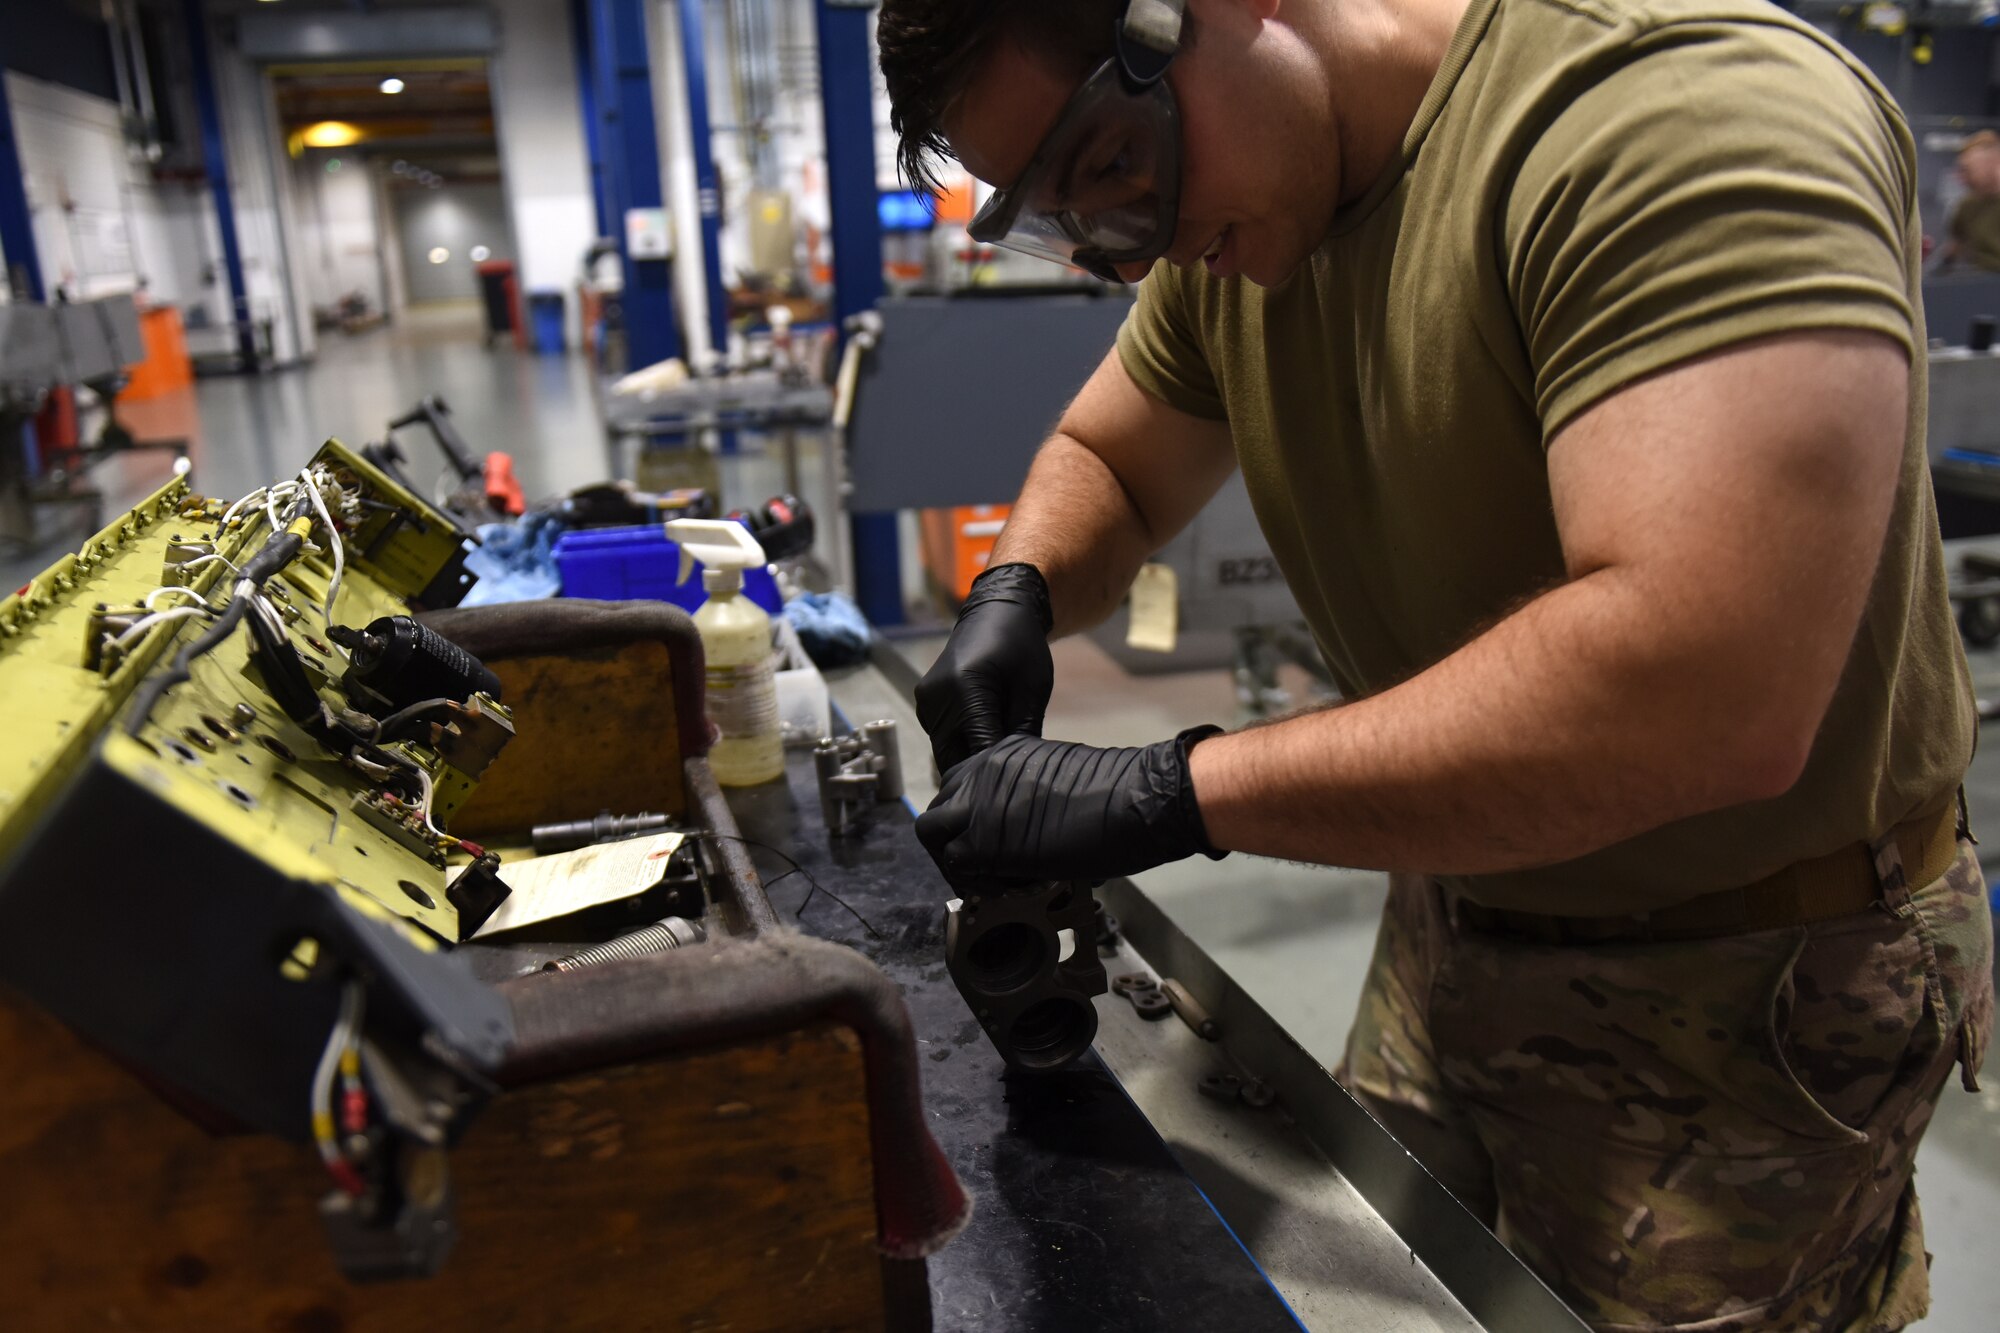 An armament maintenance technician from the 48th Munitions Squadron cleans and inspects a breech assembly of a BRU-47 bomb rack at Royal Air Force Lakenheath, England, Sept. 11, 2019. Armament Flight’s main focus is to support the flightline operations, either by having equipment ready or standing by for flightline responses. (U.S. Air Force photo by Airman 1st Class Madeline Herzog)